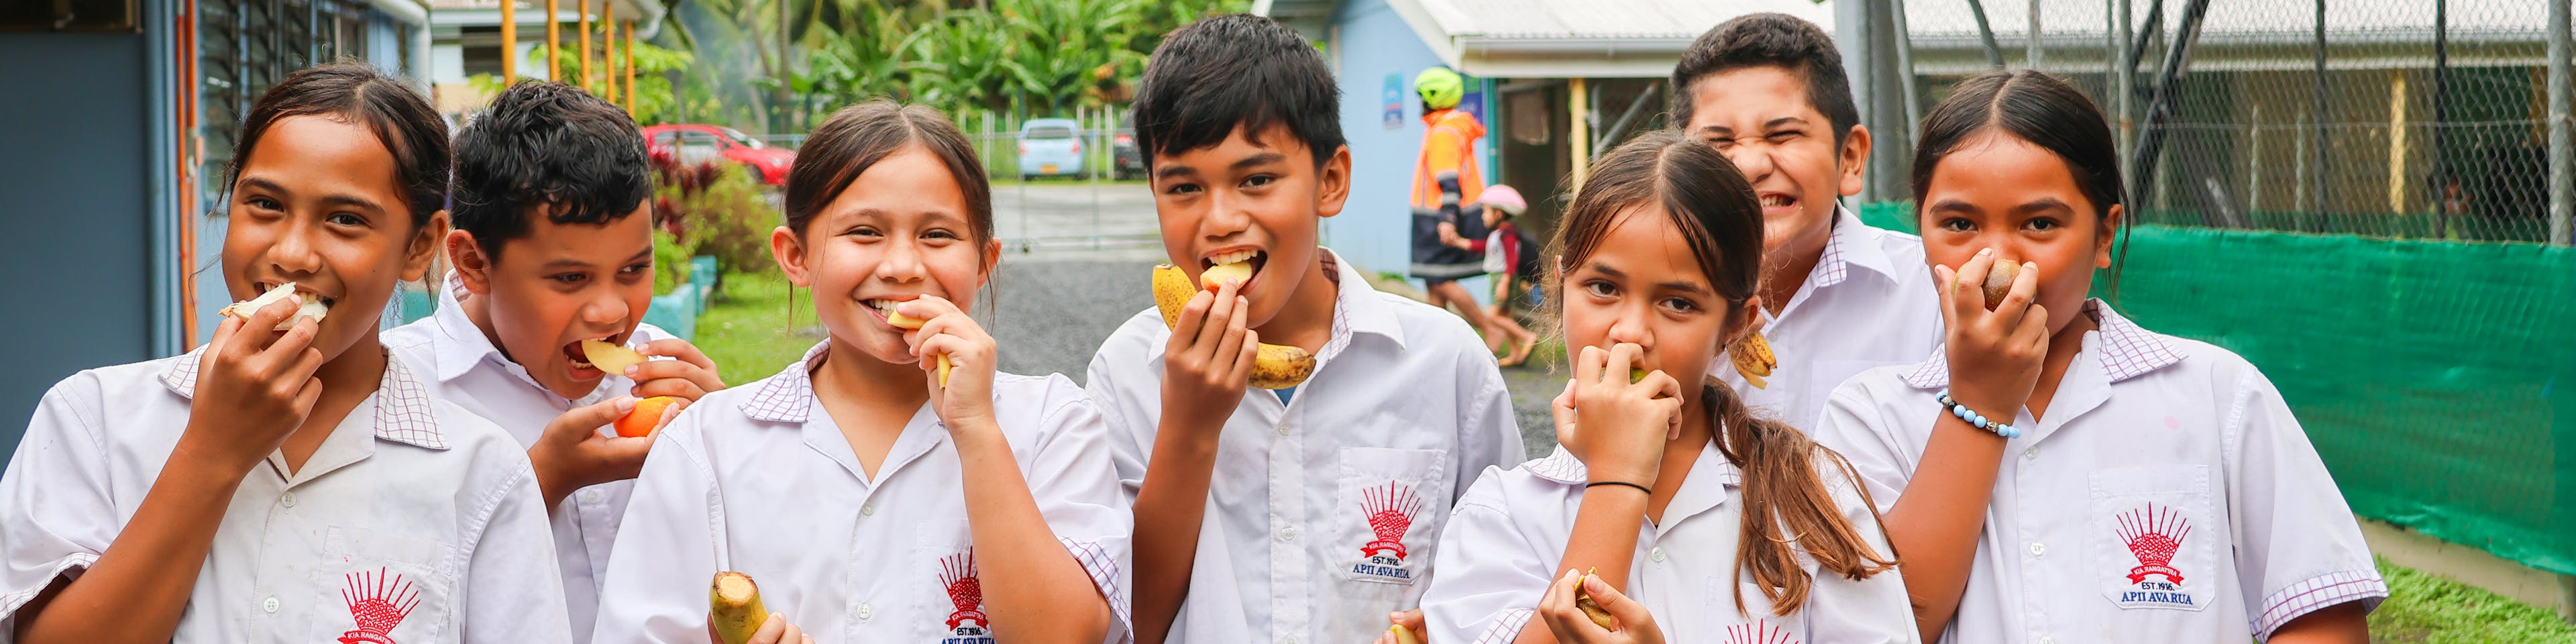 Children of Apii Avarua Primary School enjoying local fruits. The students actively participate in an initiative that emphasizes the importance of eating and appreciating local fruits and vegetables. By bringing a fruit each week, the school aims to encourage children to develop a love for nutritious foods.